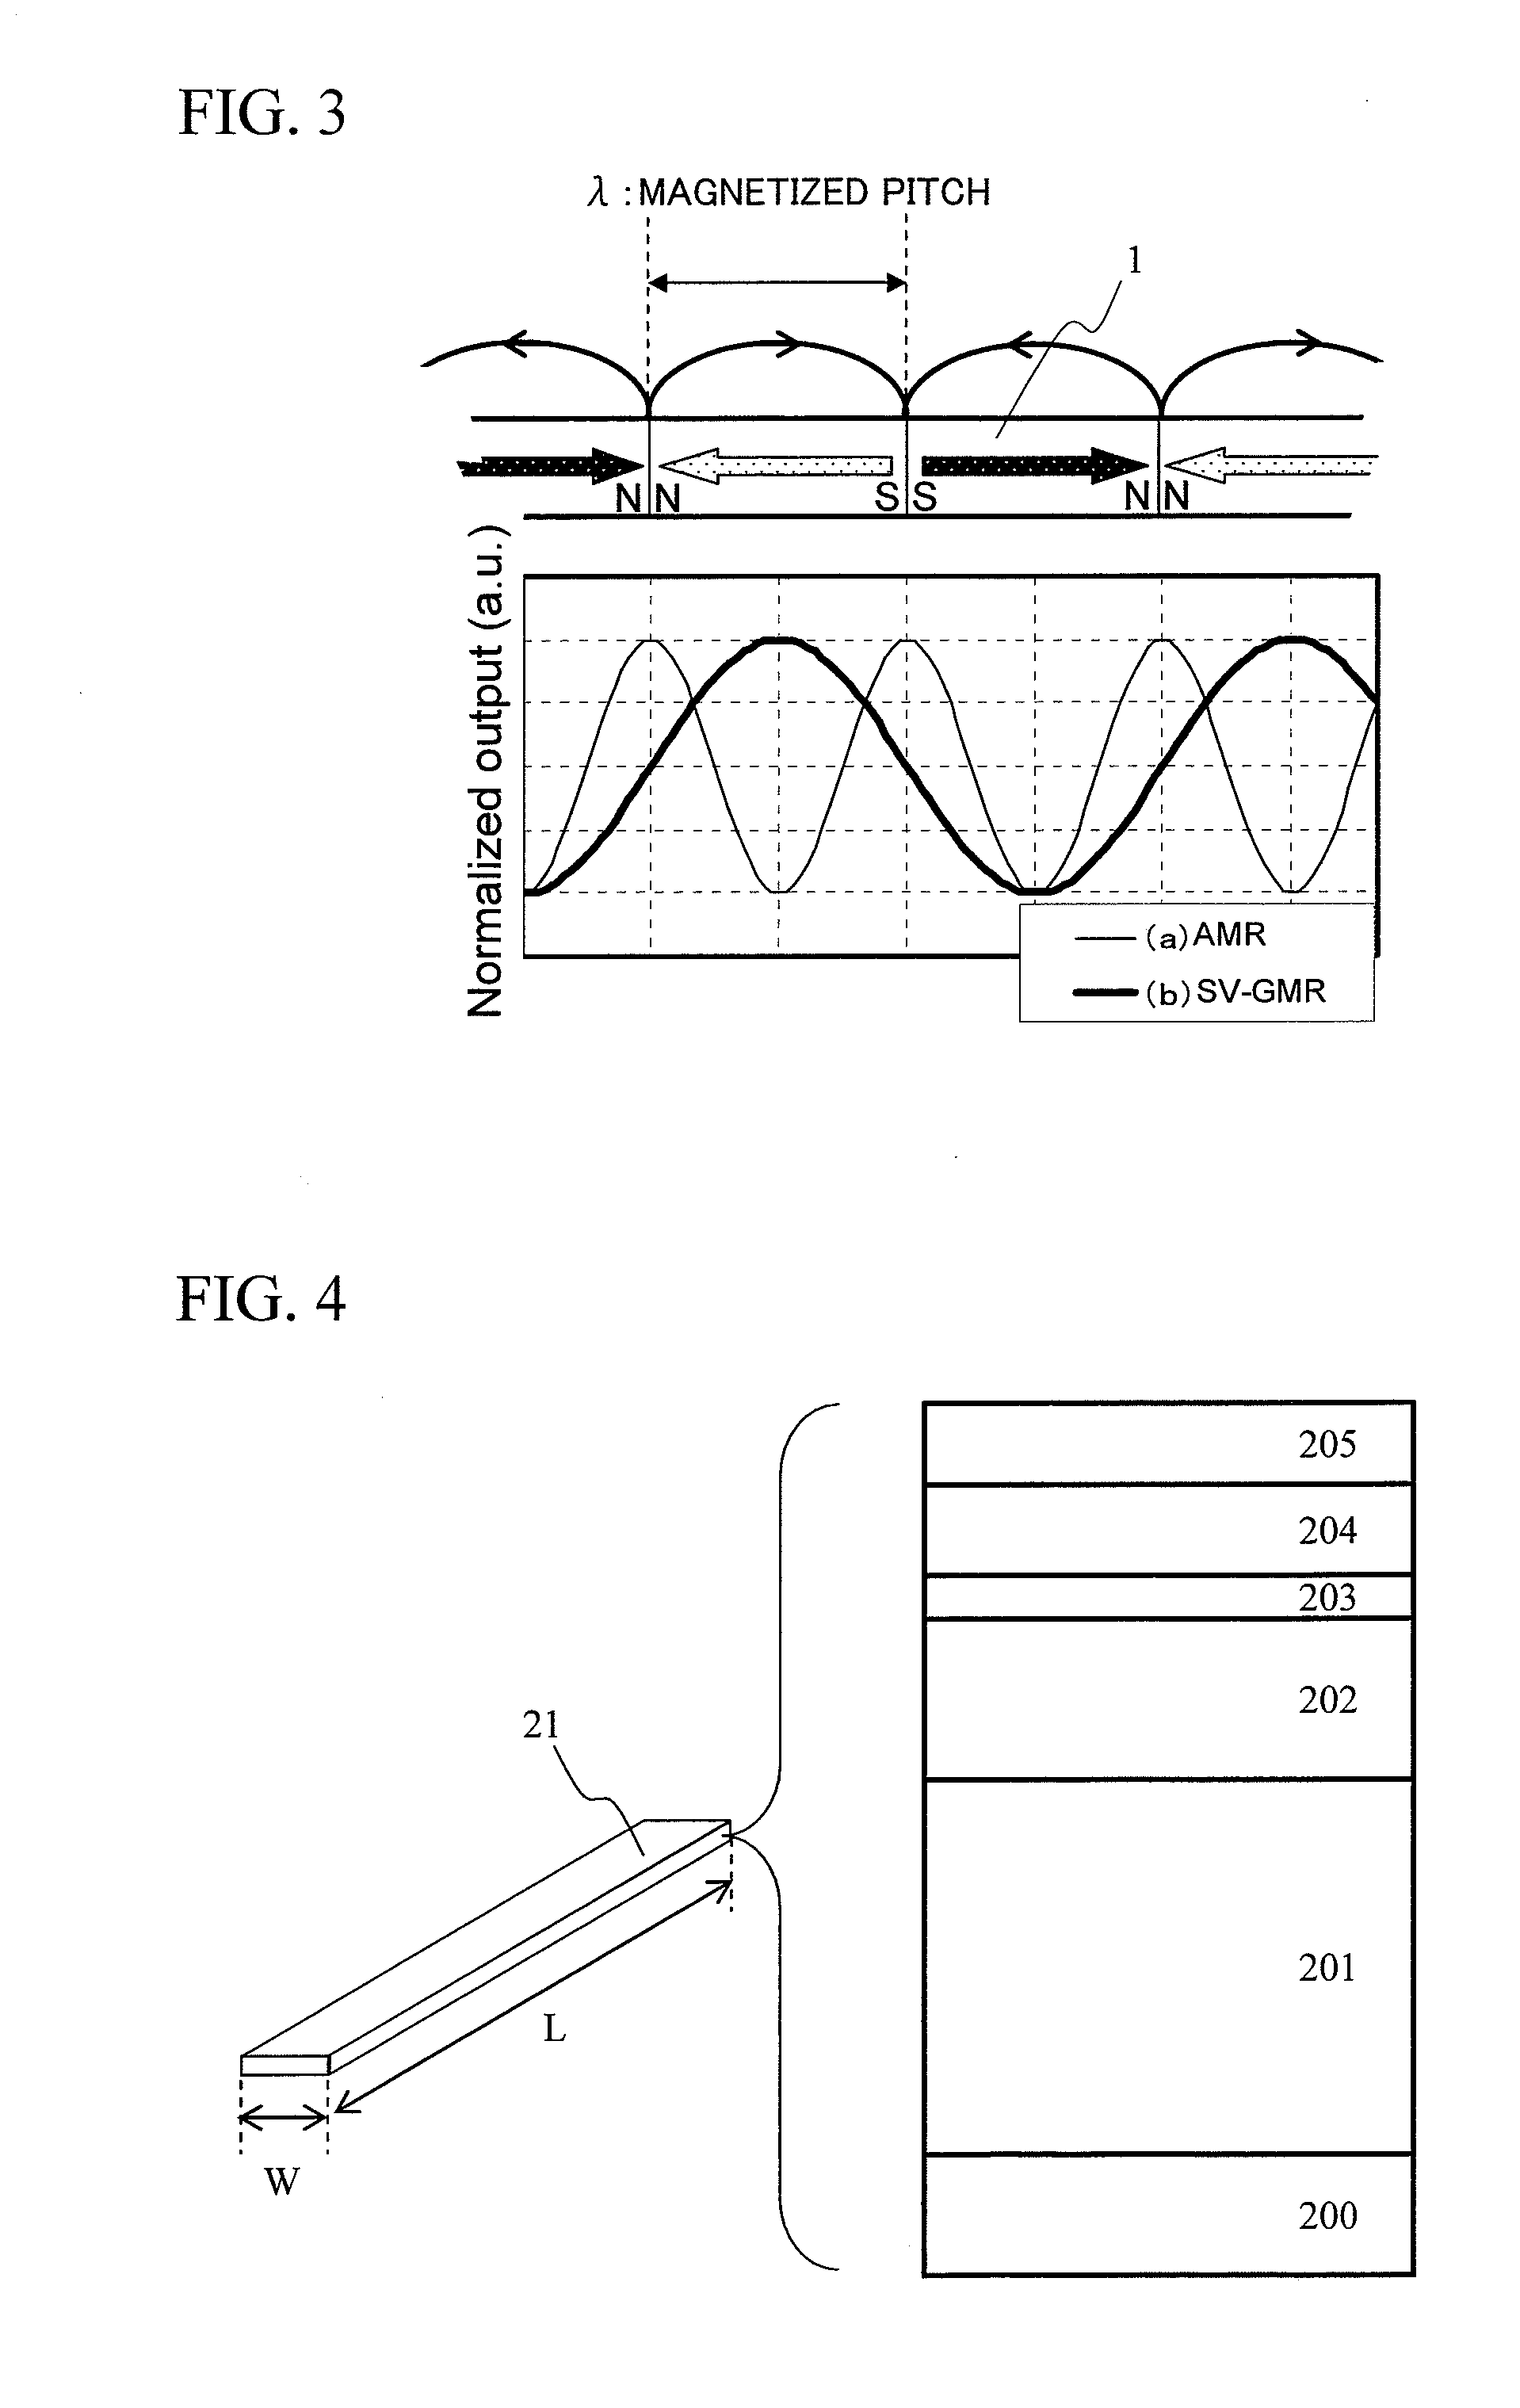 Magnetic encoder having a stable output property with unsaturated magnetic sensor